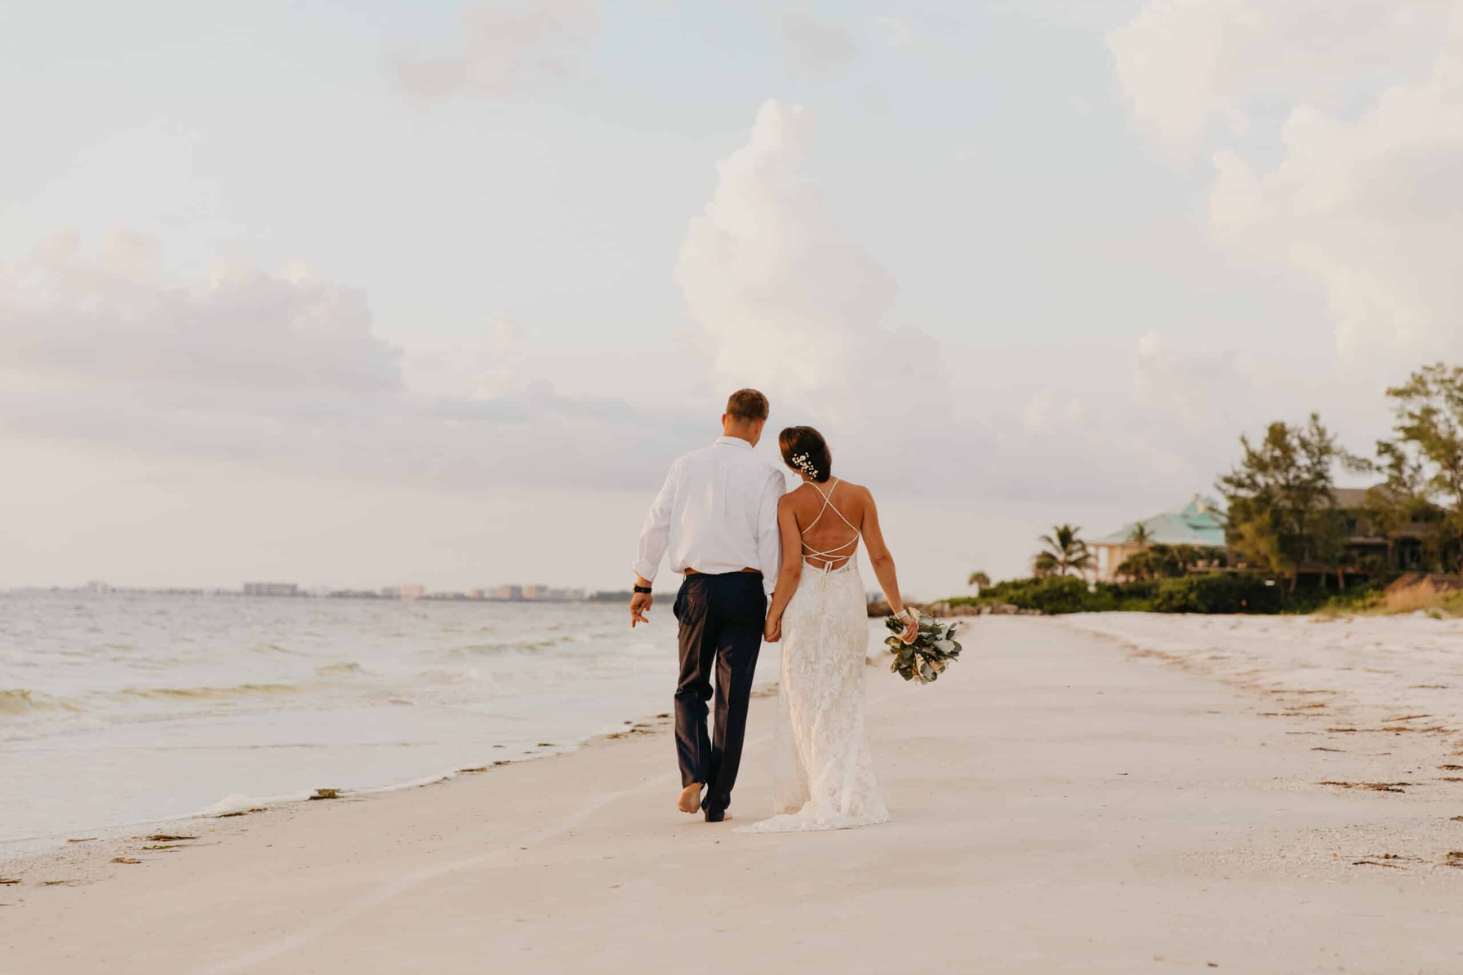 Wedding Transportation Services in Tampa